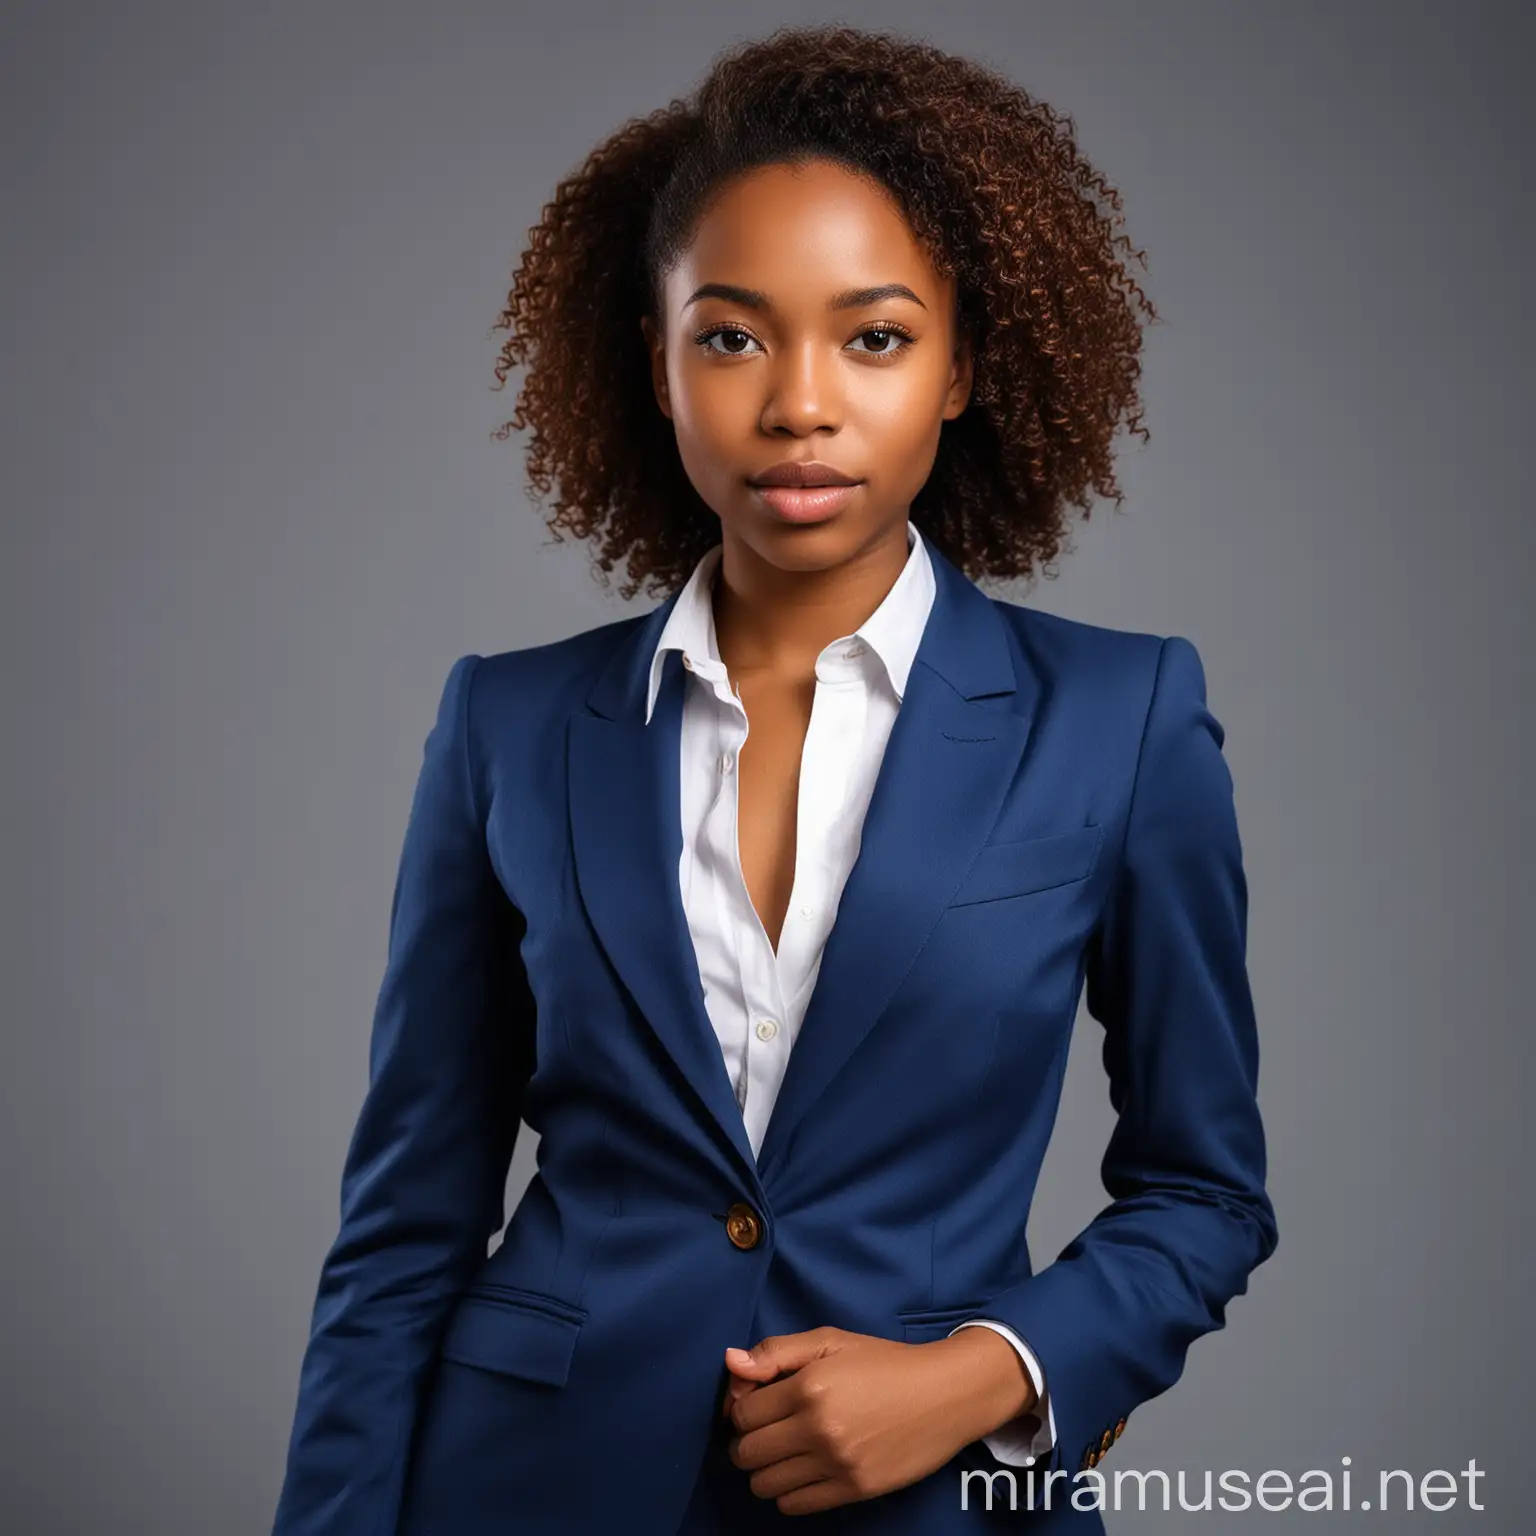 Professional African American Woman in Blue Business Attire